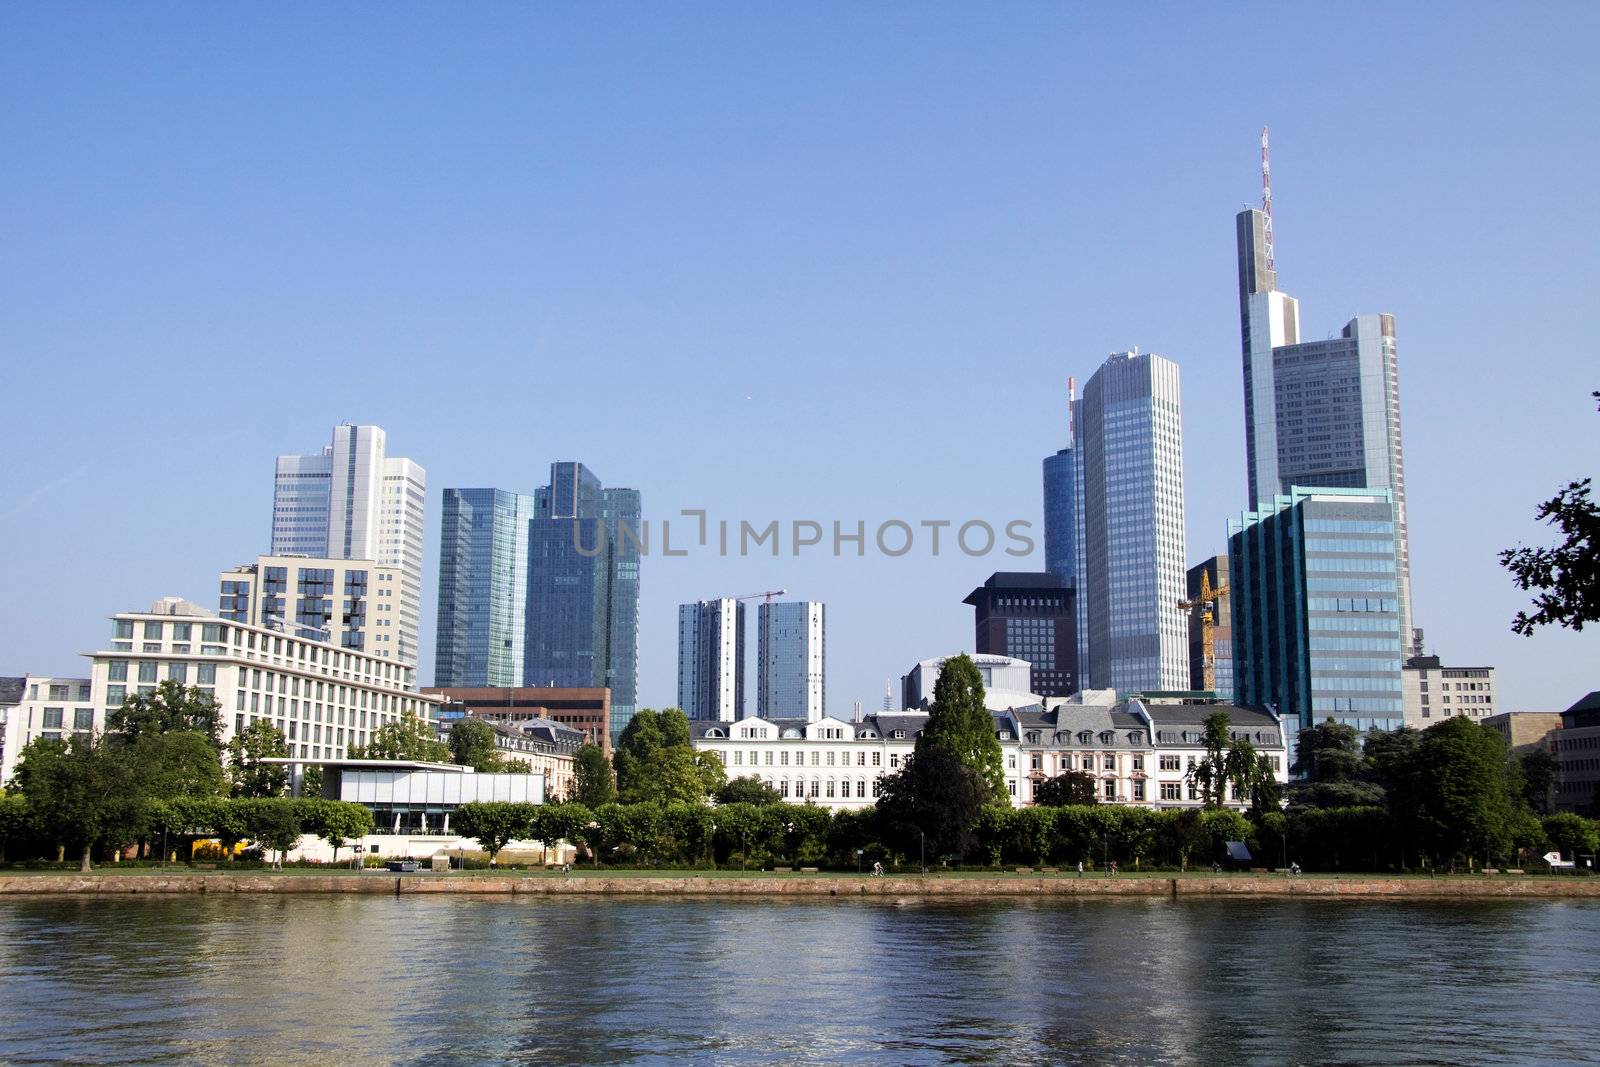 Frankfurt skyline from the other side of the river